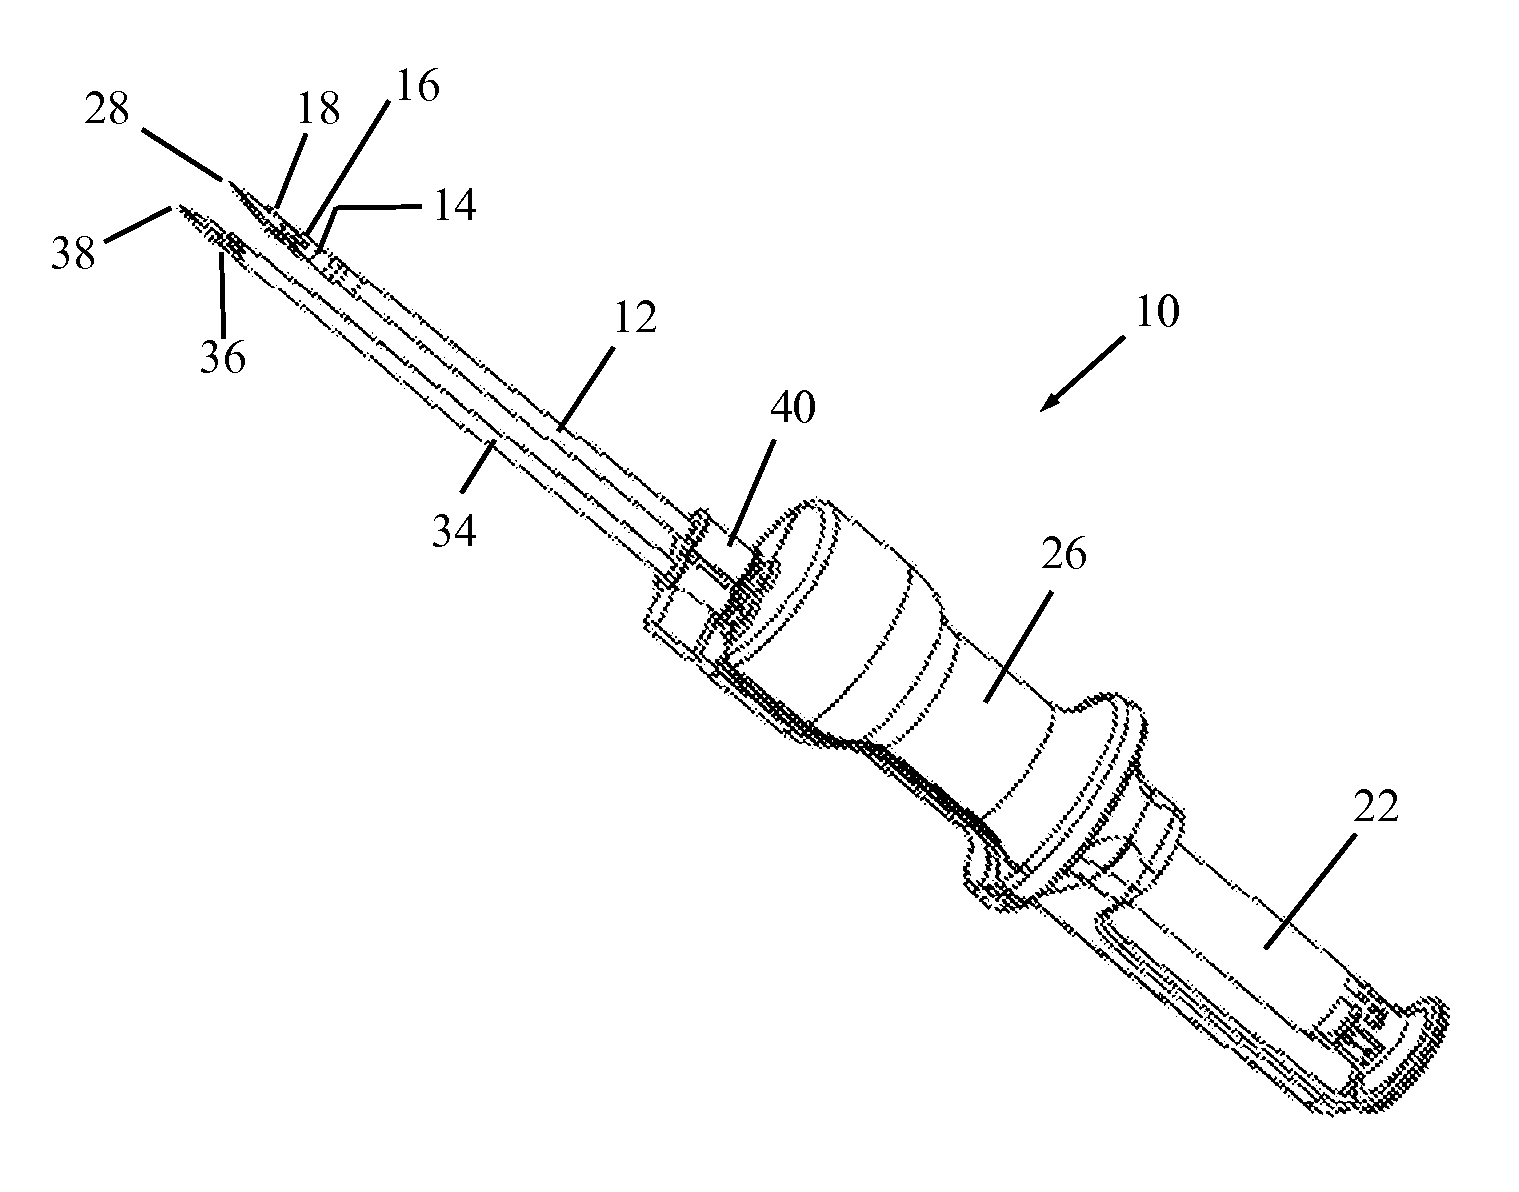 Multiple-needle suturing assembly